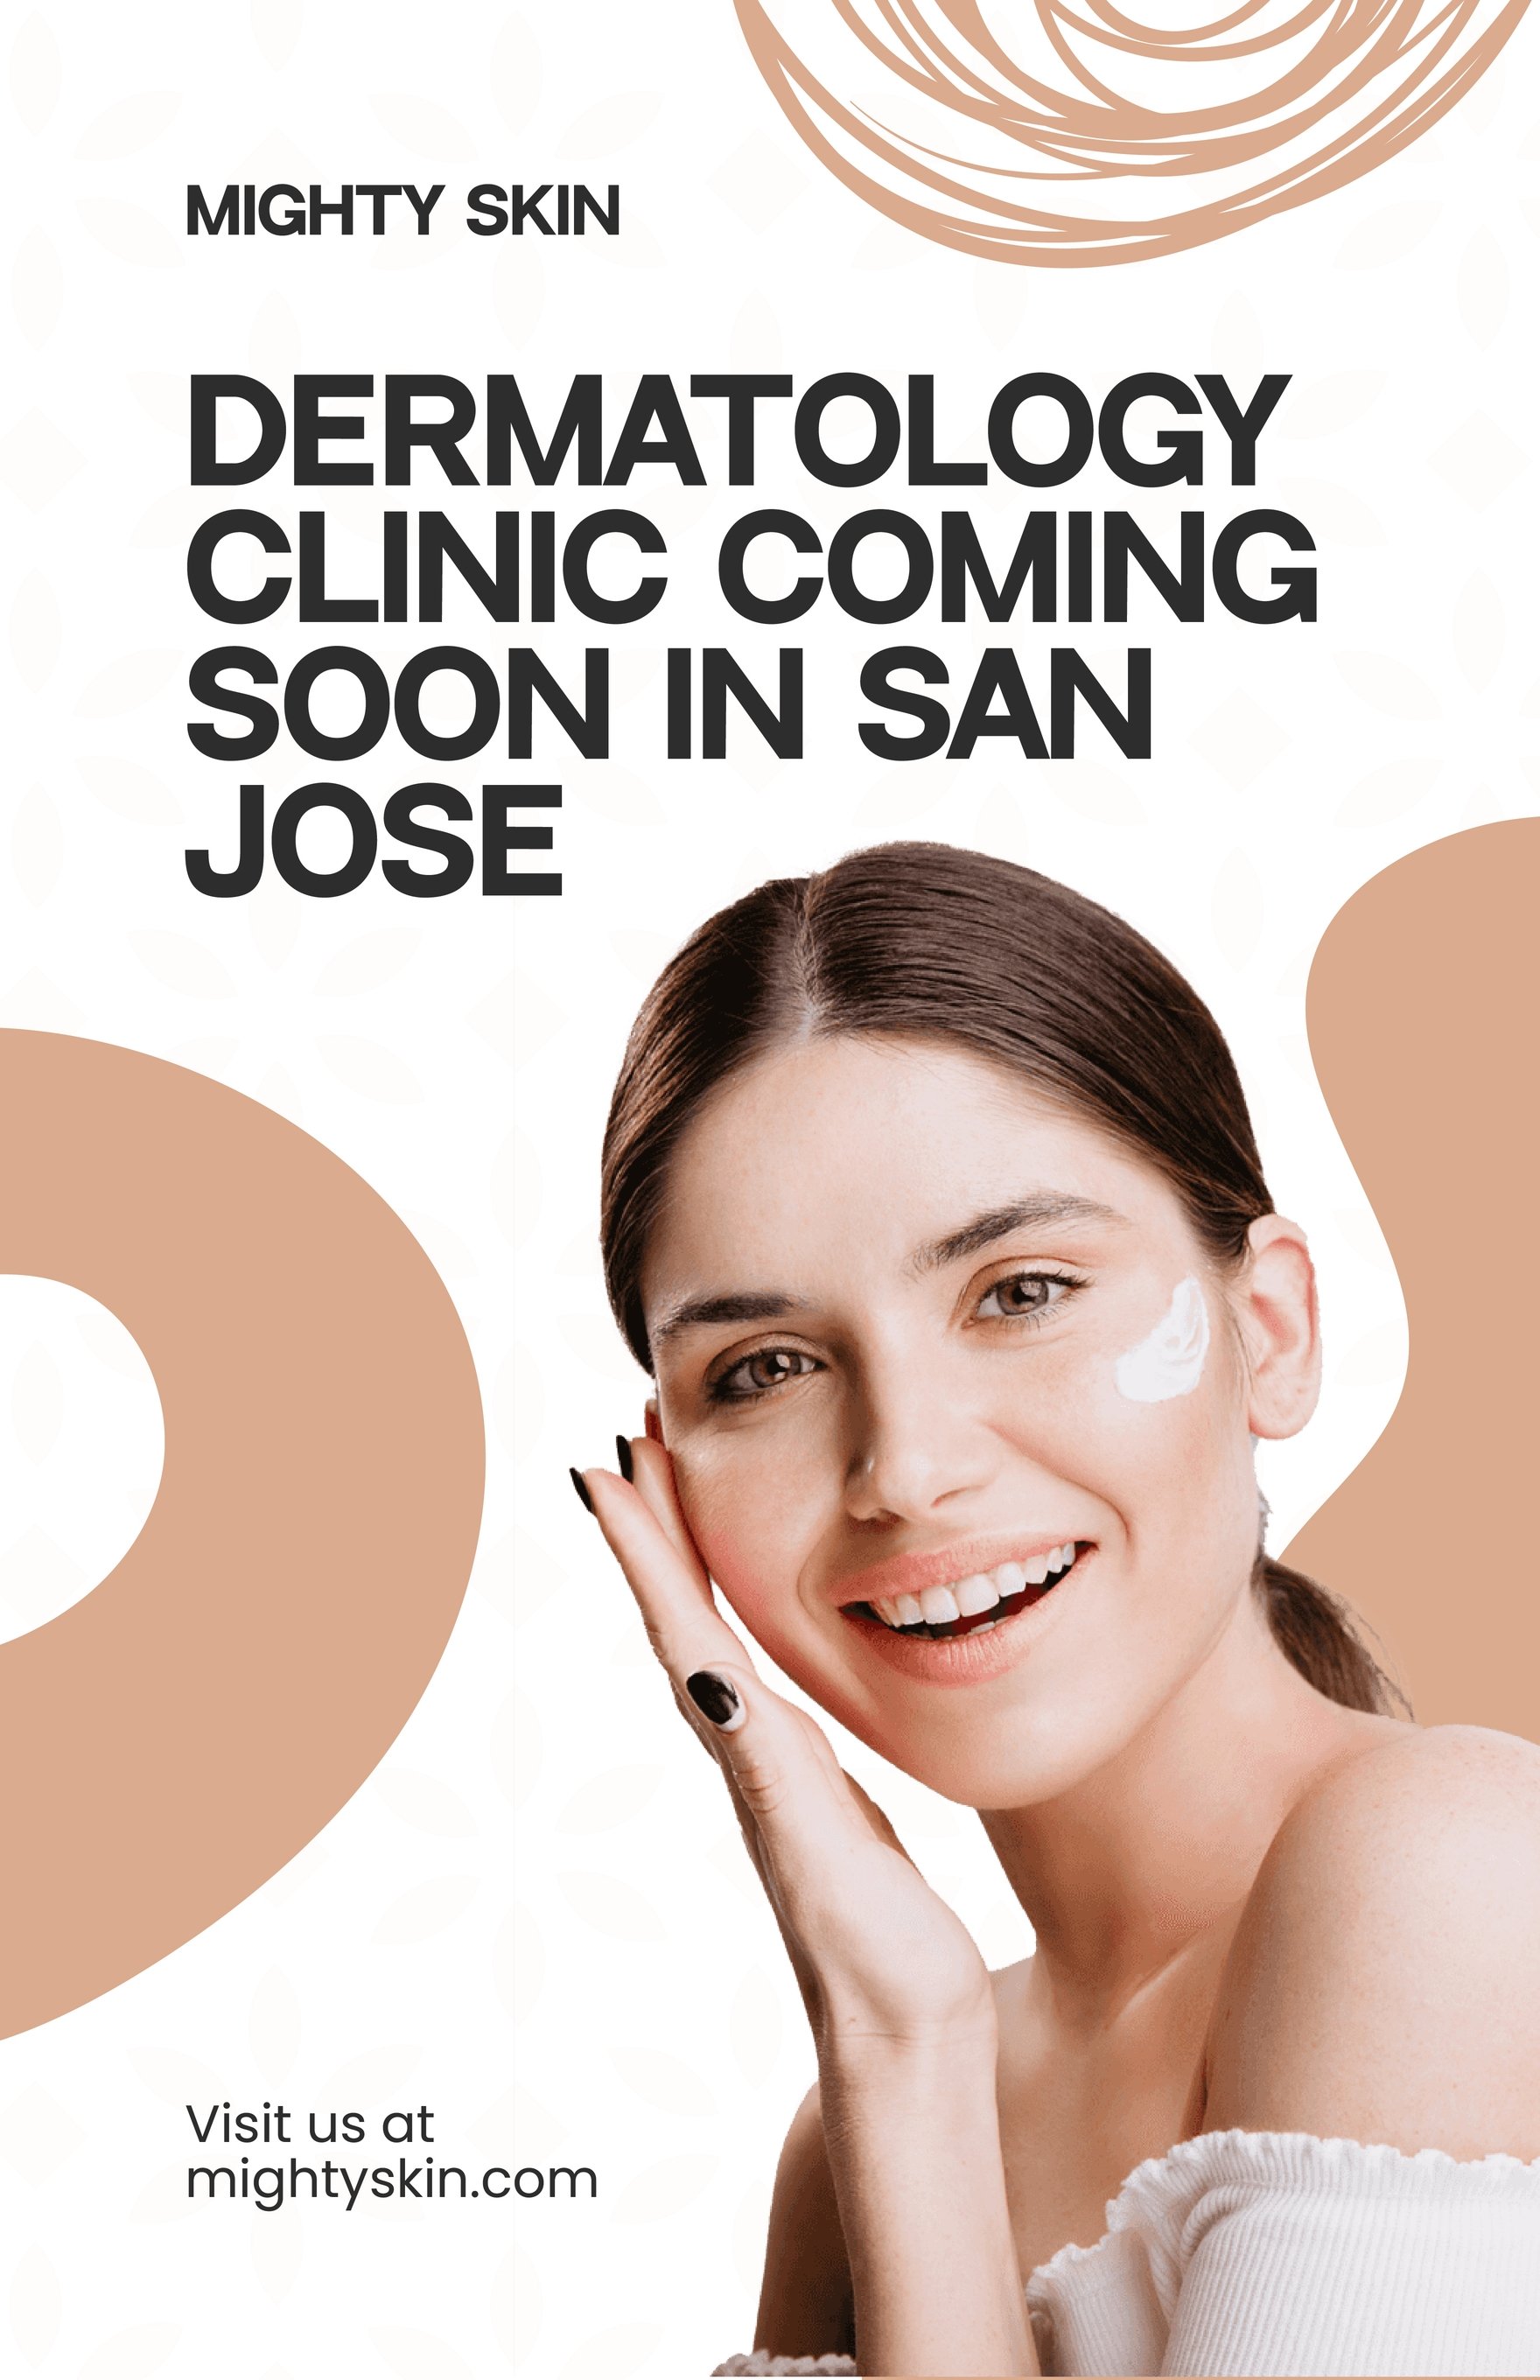 Free Clinic Coming Soon Poster in Word, Google Docs, Illustrator, PSD, Apple Pages, Publisher